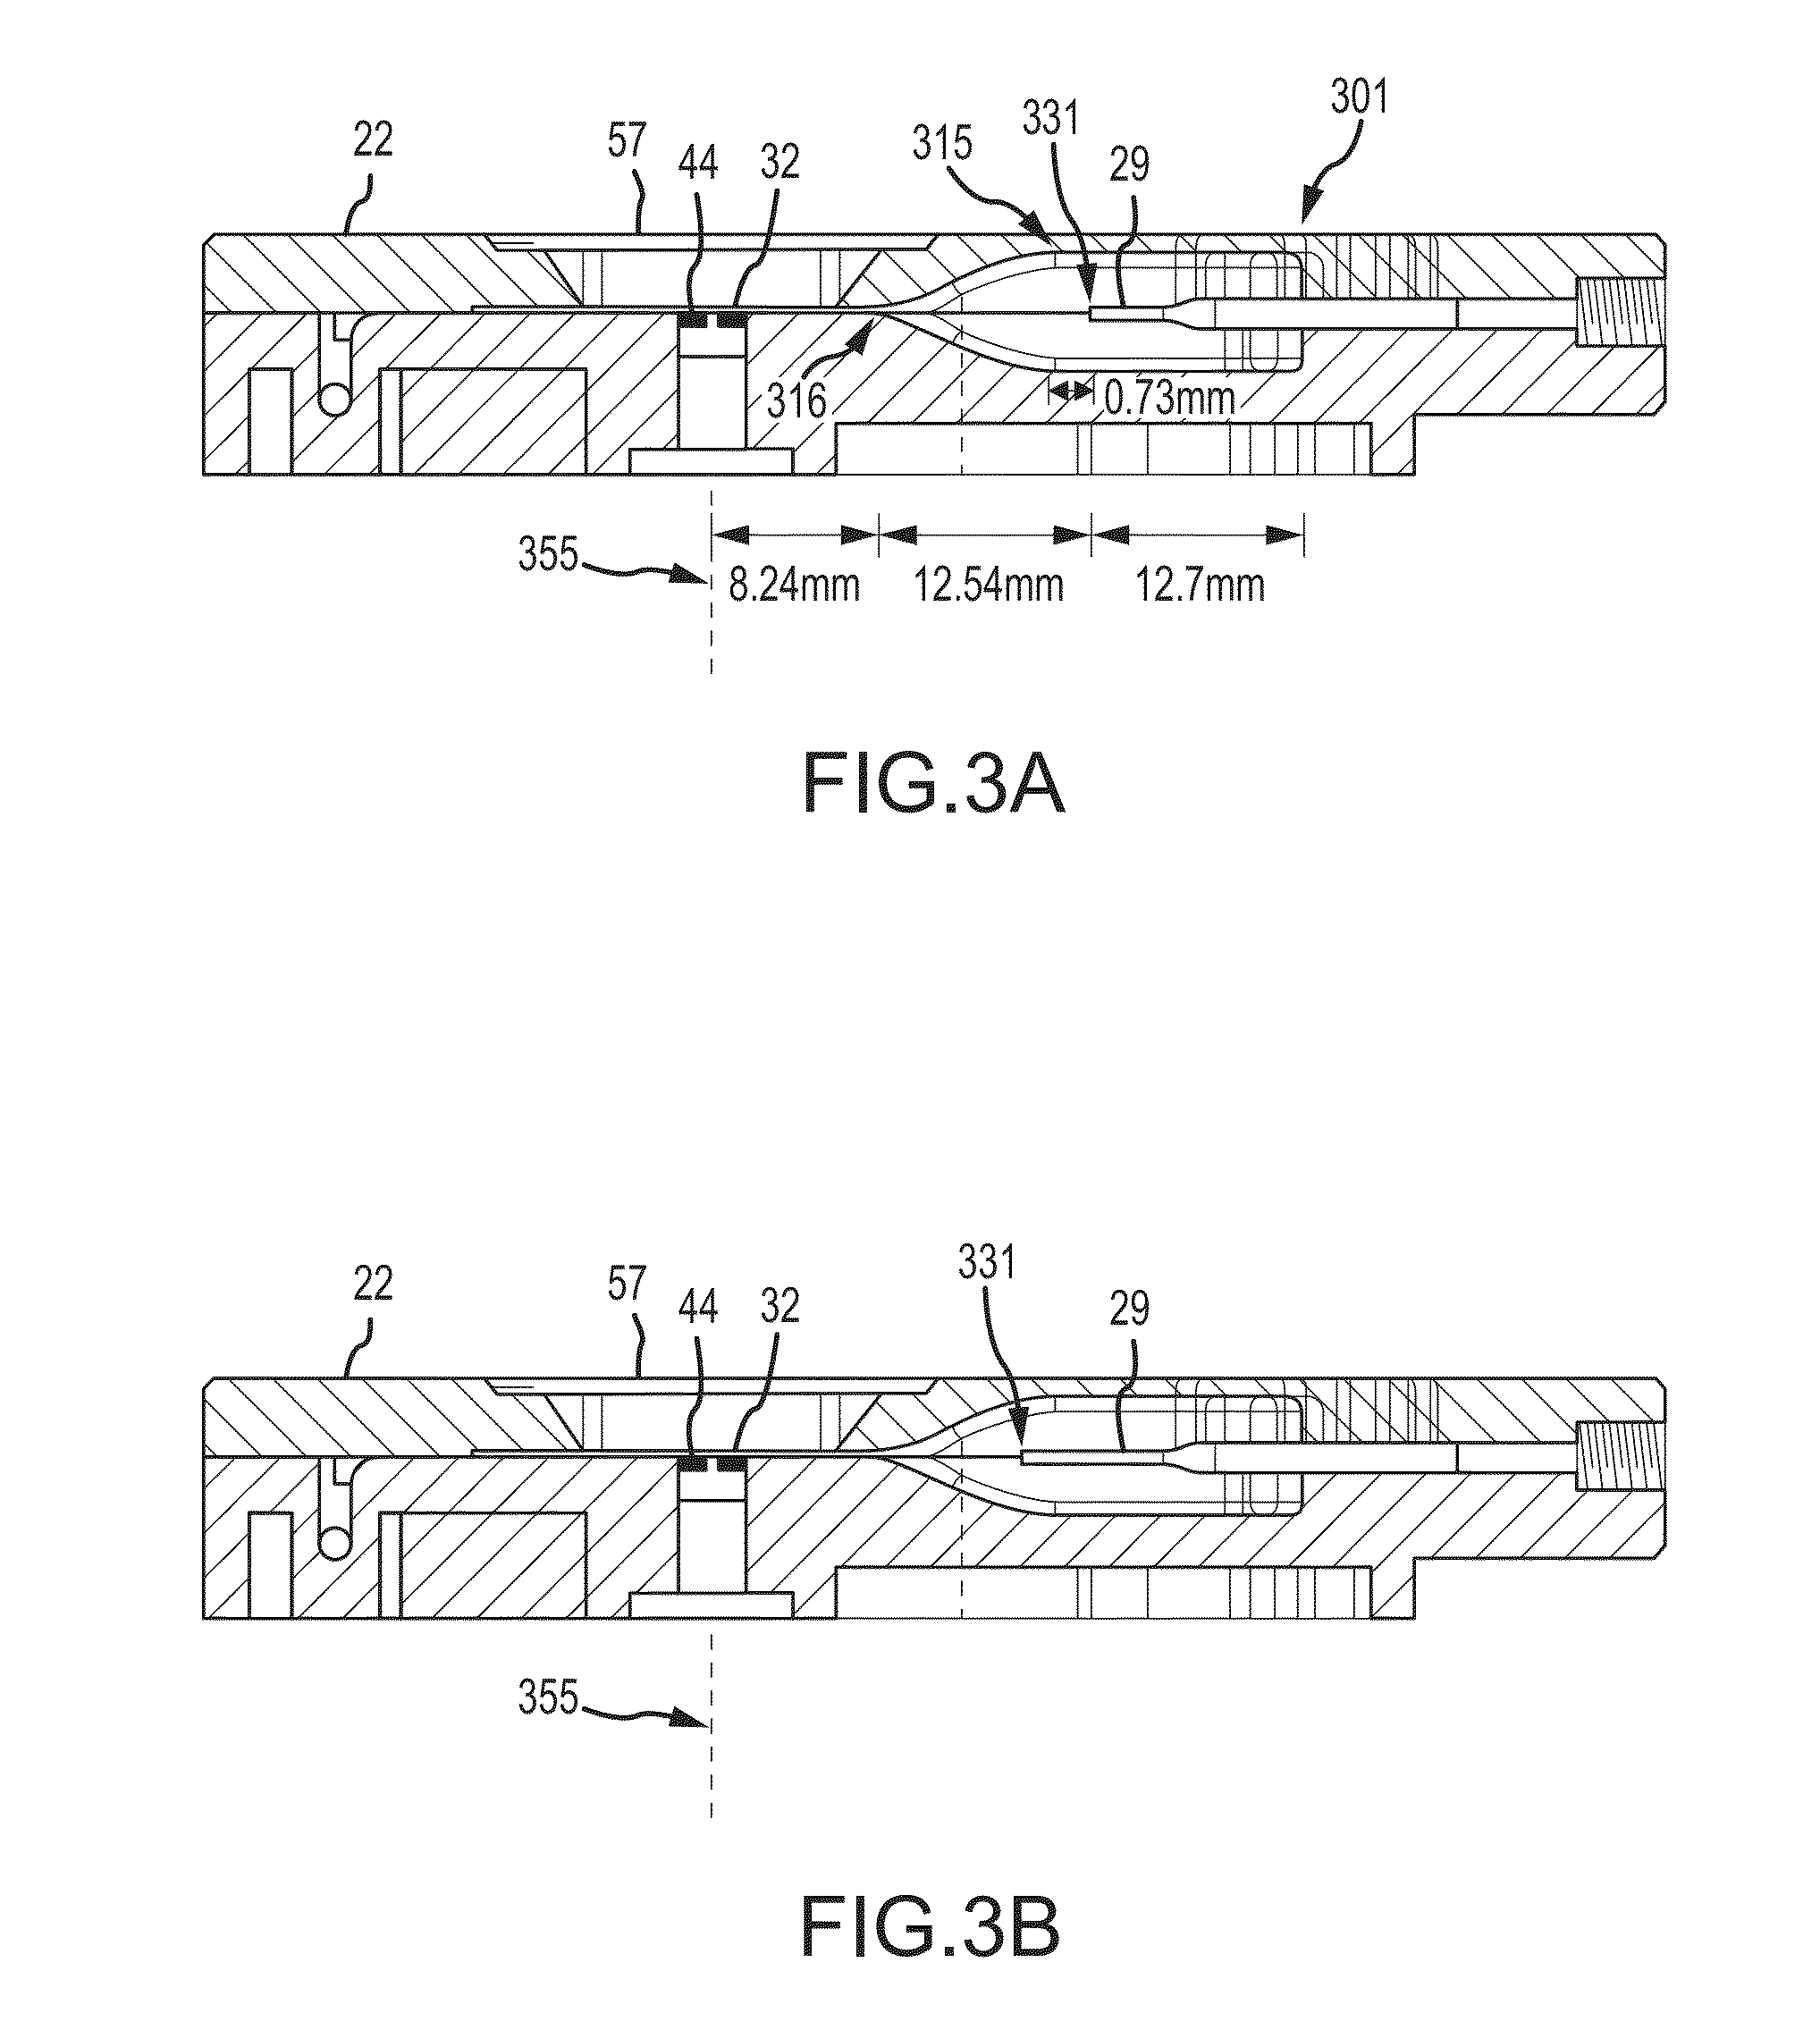 Sheath fluid systems and methods for particle analysis in blood samples